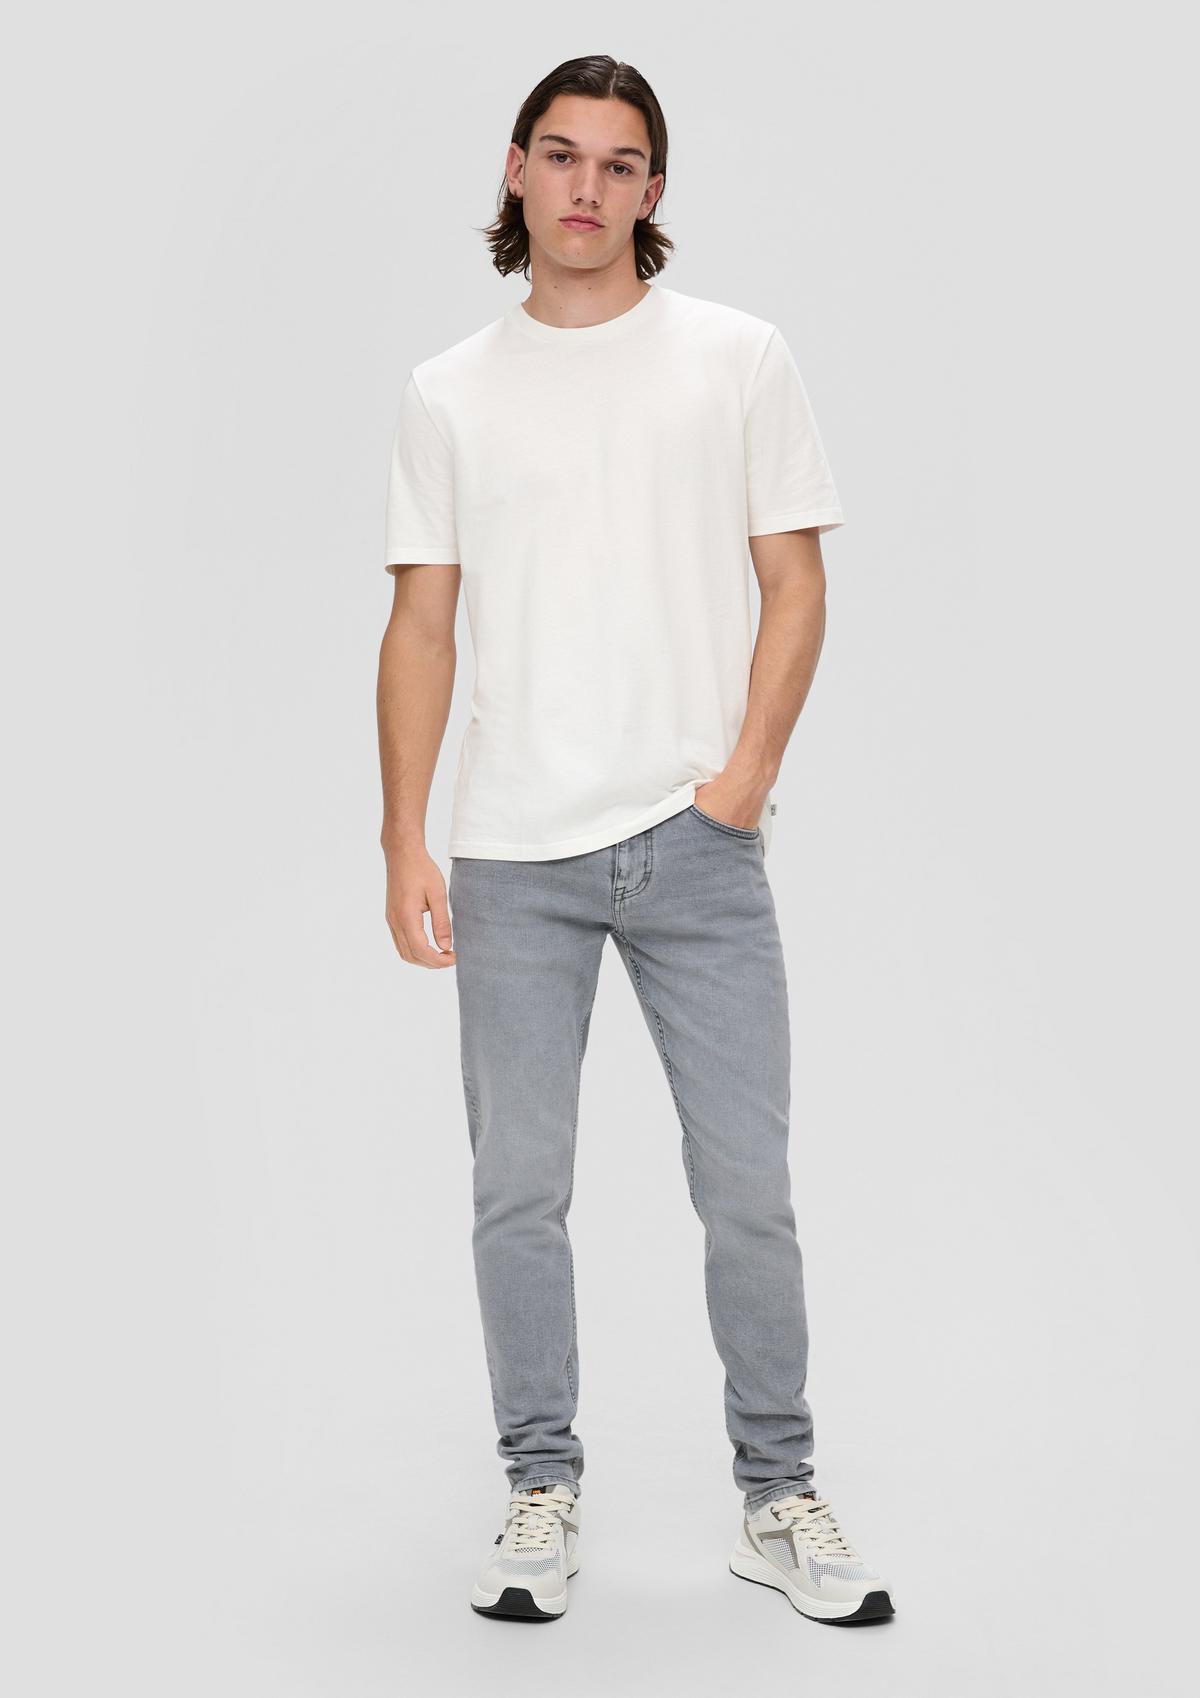 s.Oliver Jeans Shawn / Regular Fit / Mid Rise / Tapered Leg